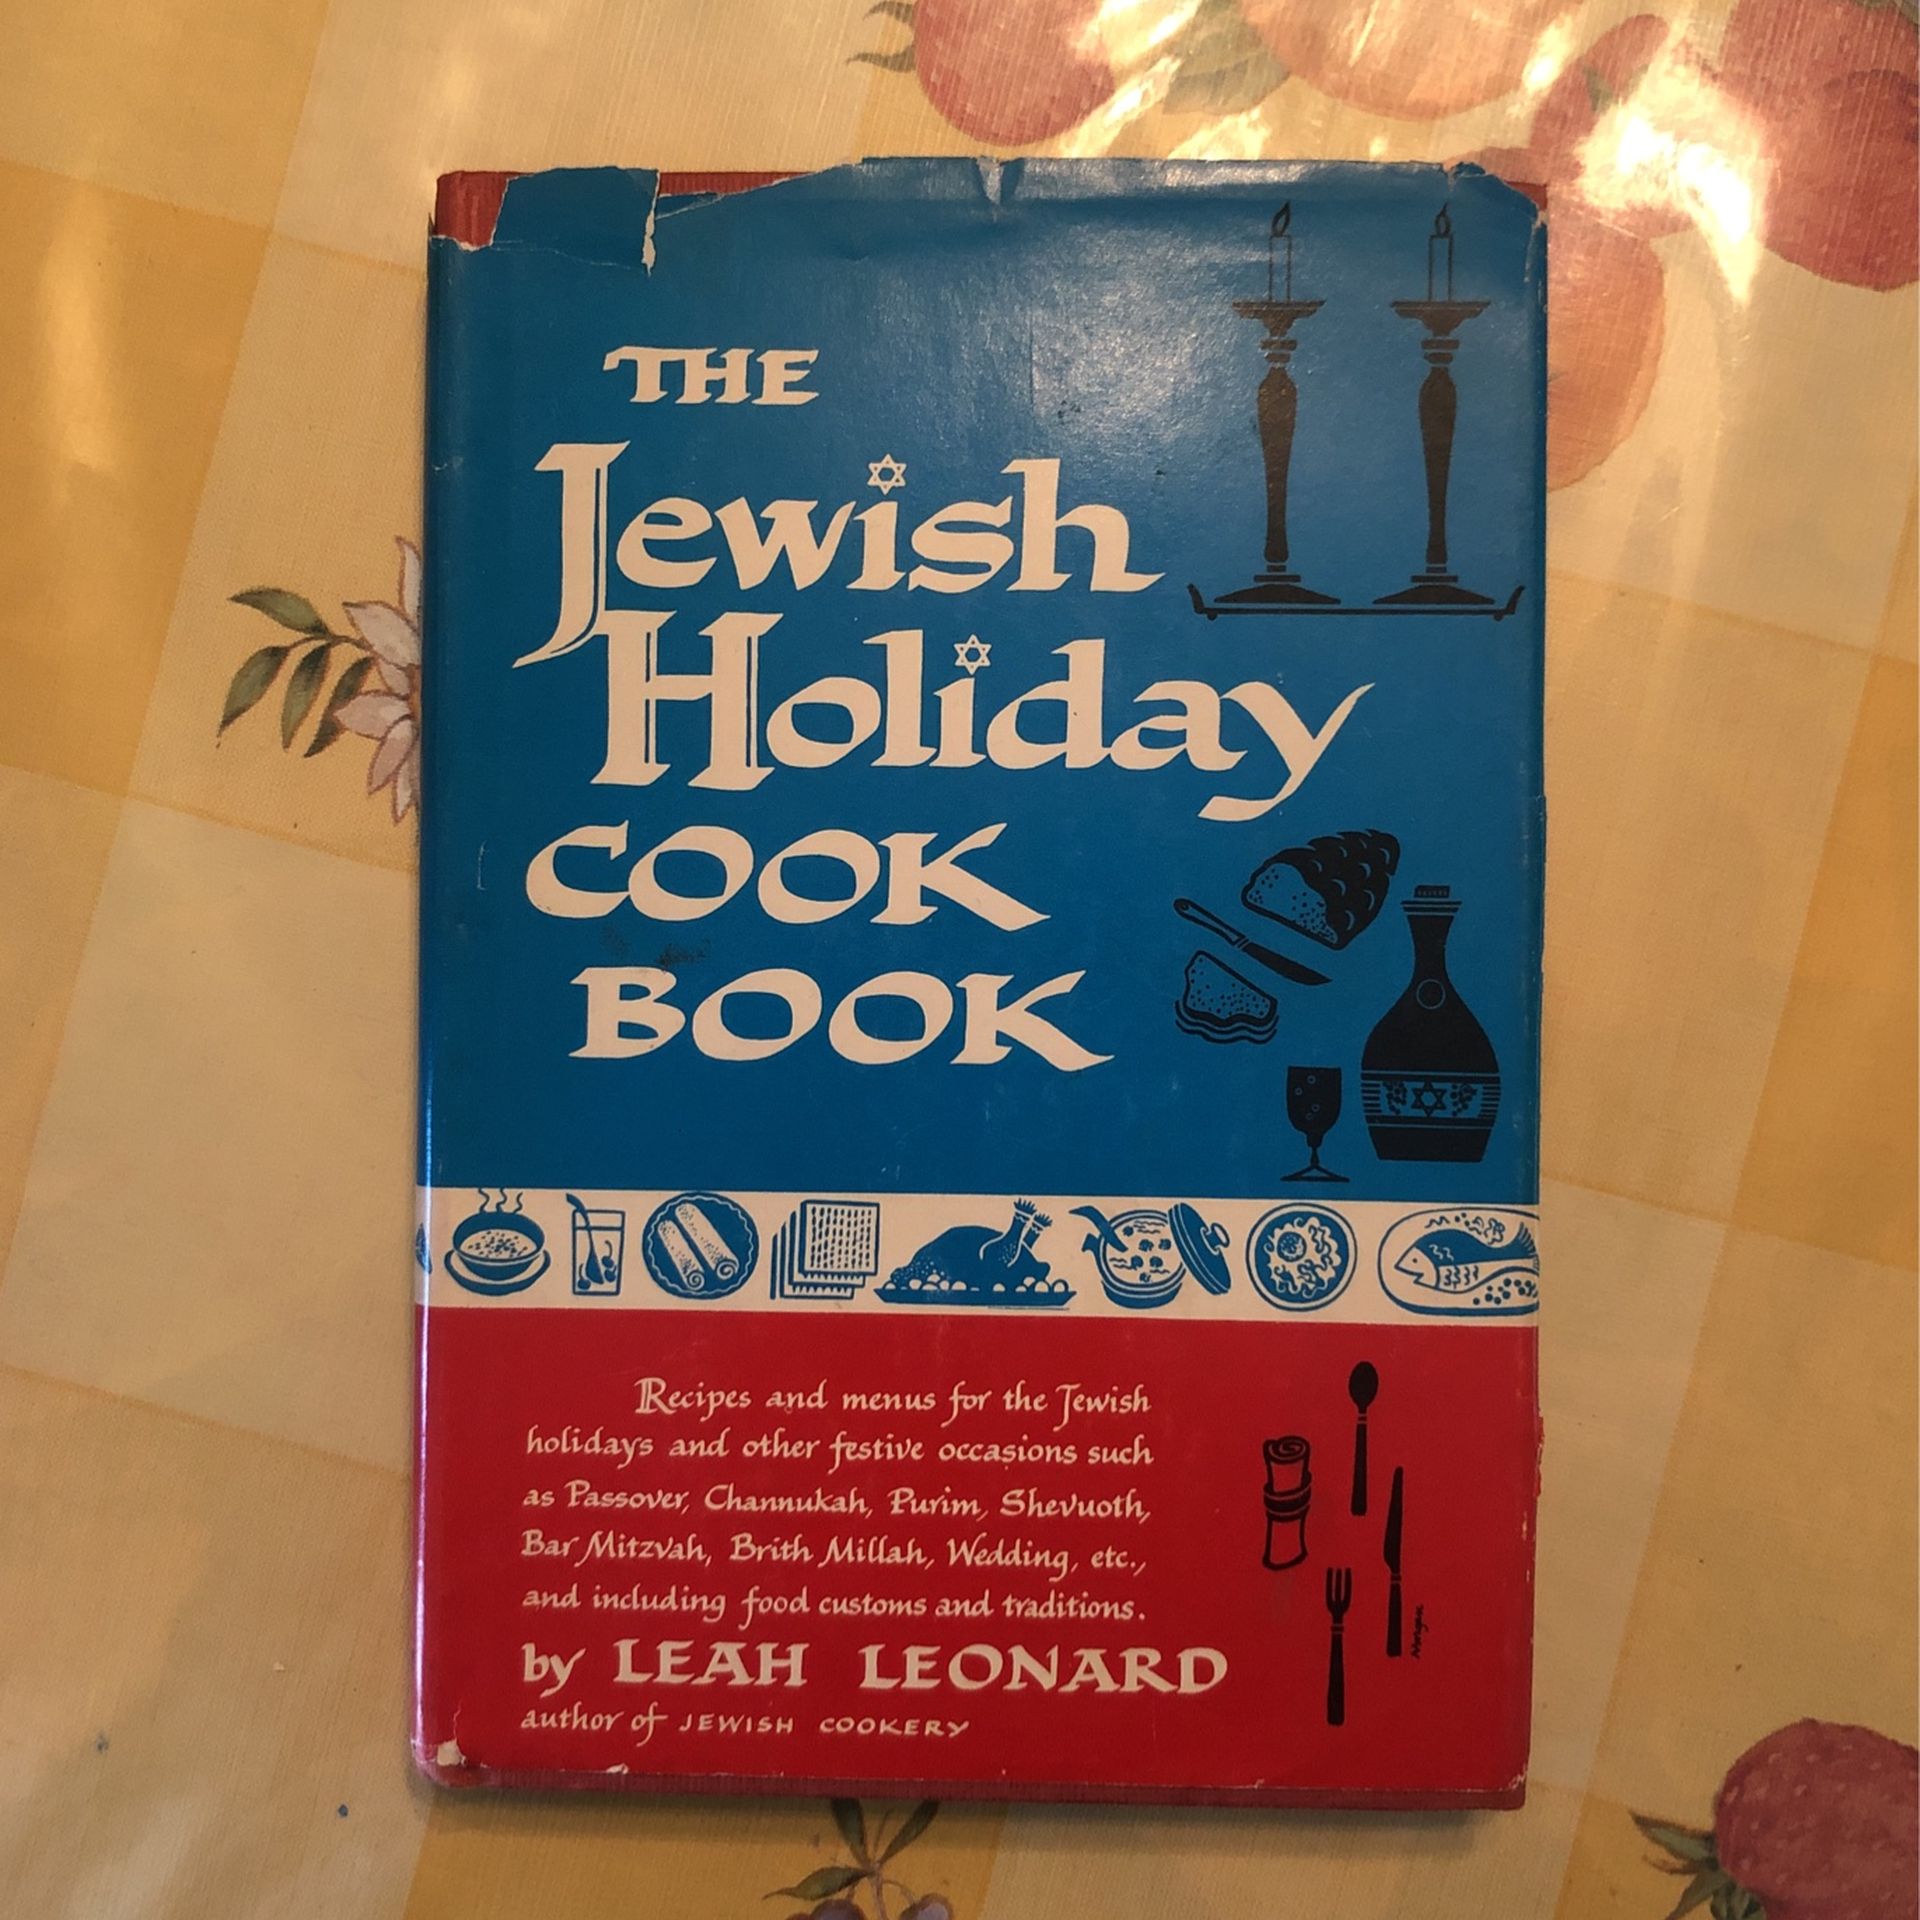 The Jewish Holiday Cook Book By Leah Leonard - BOGO Of Equal Or Lesser Value